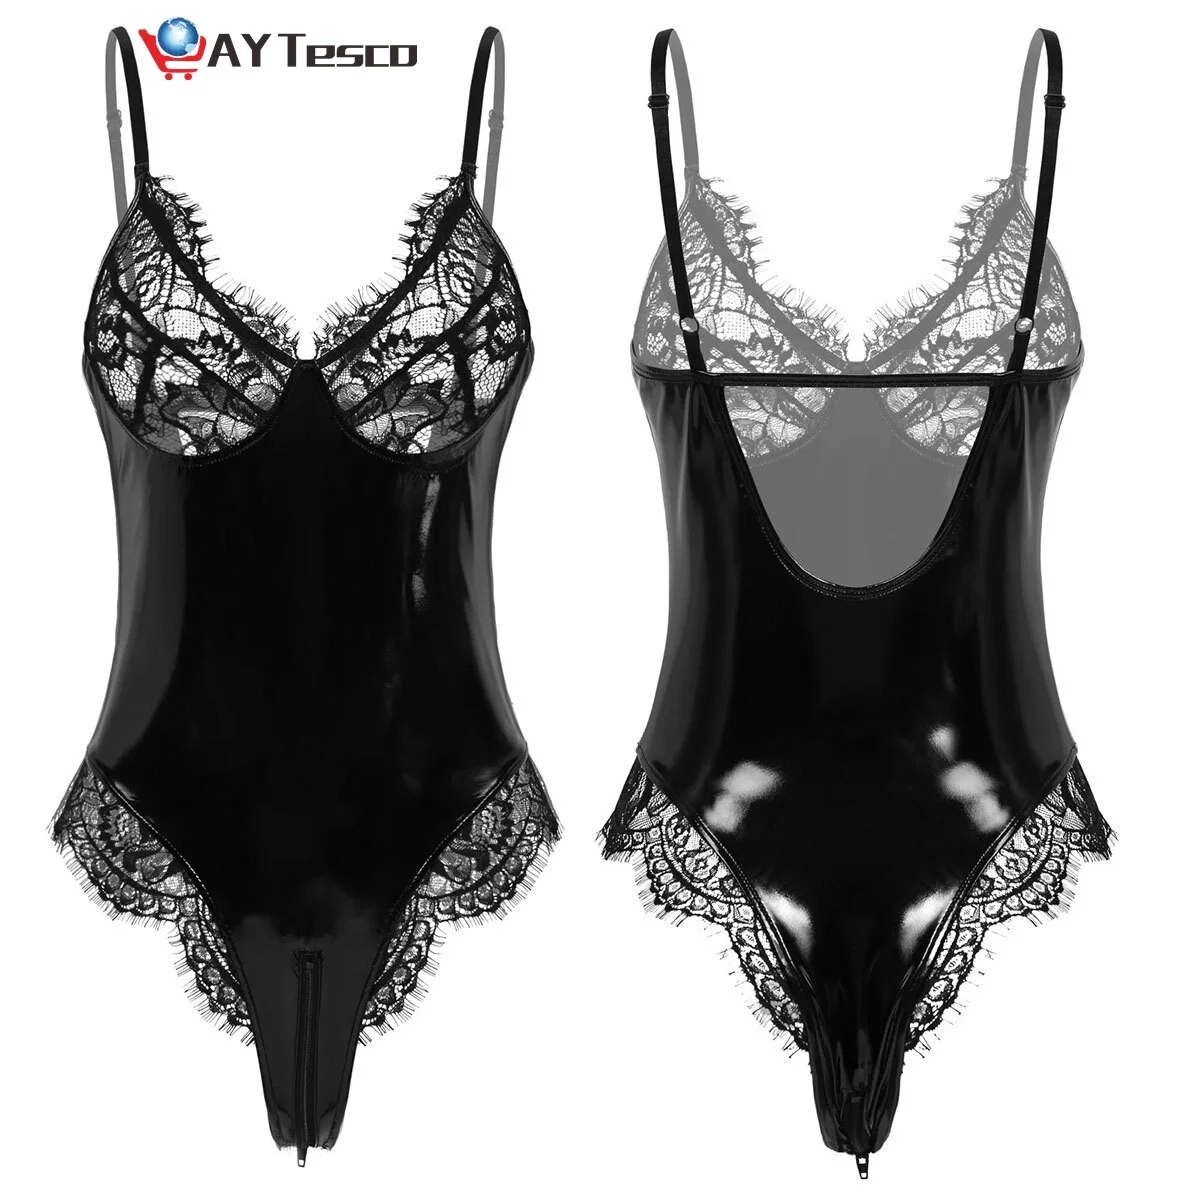 

Women Hot One-Piece PVC Leather Lingerie Sissy Latex Catsuit Sexy Body Sheer Lace Cups Open Crotch Thong Teddy Bodysuit Clubwear